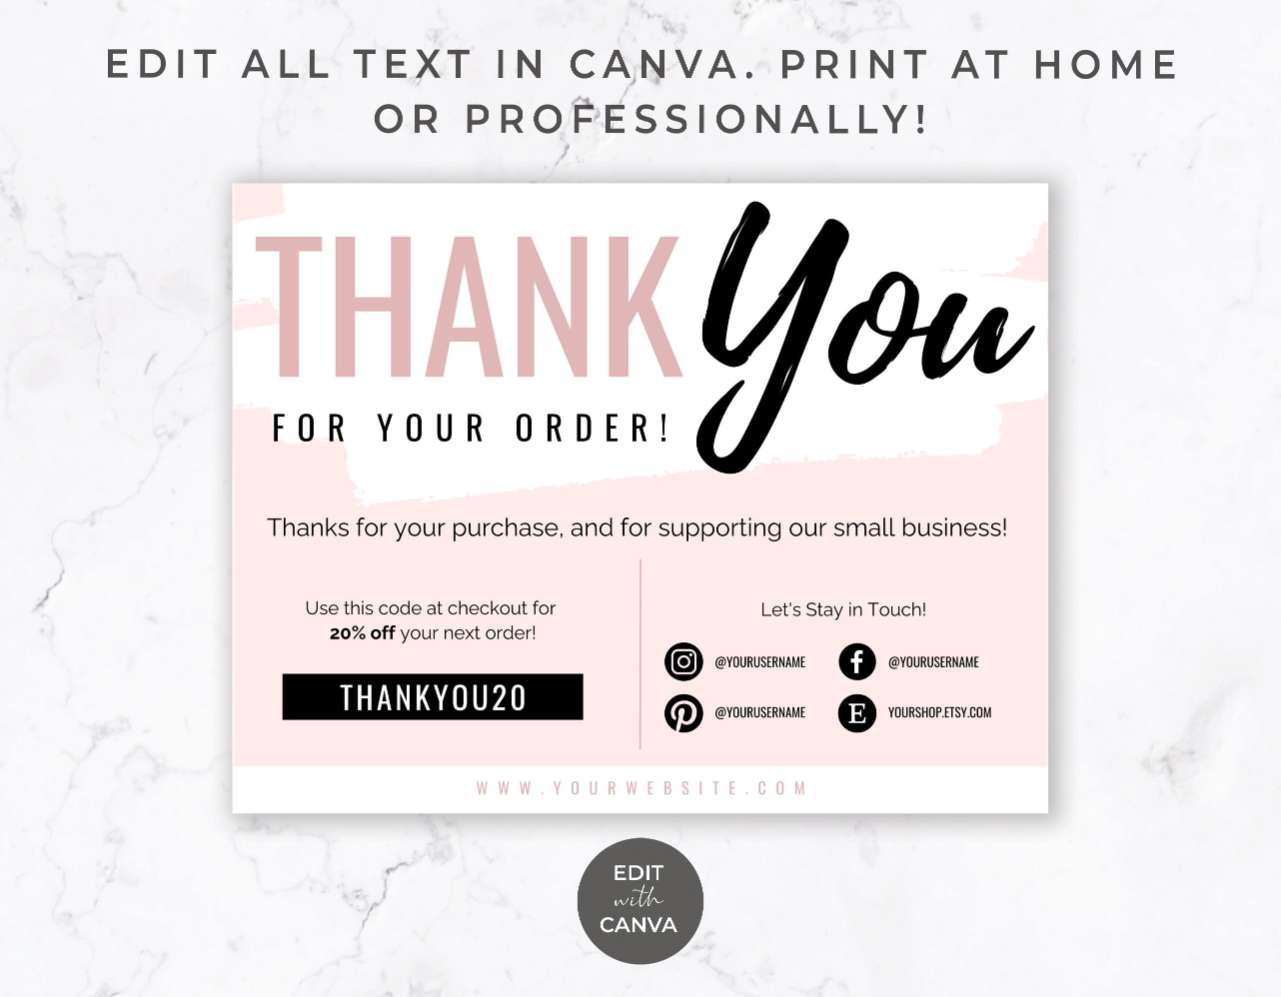 Thank You Order Card for Canva - Blush & Black